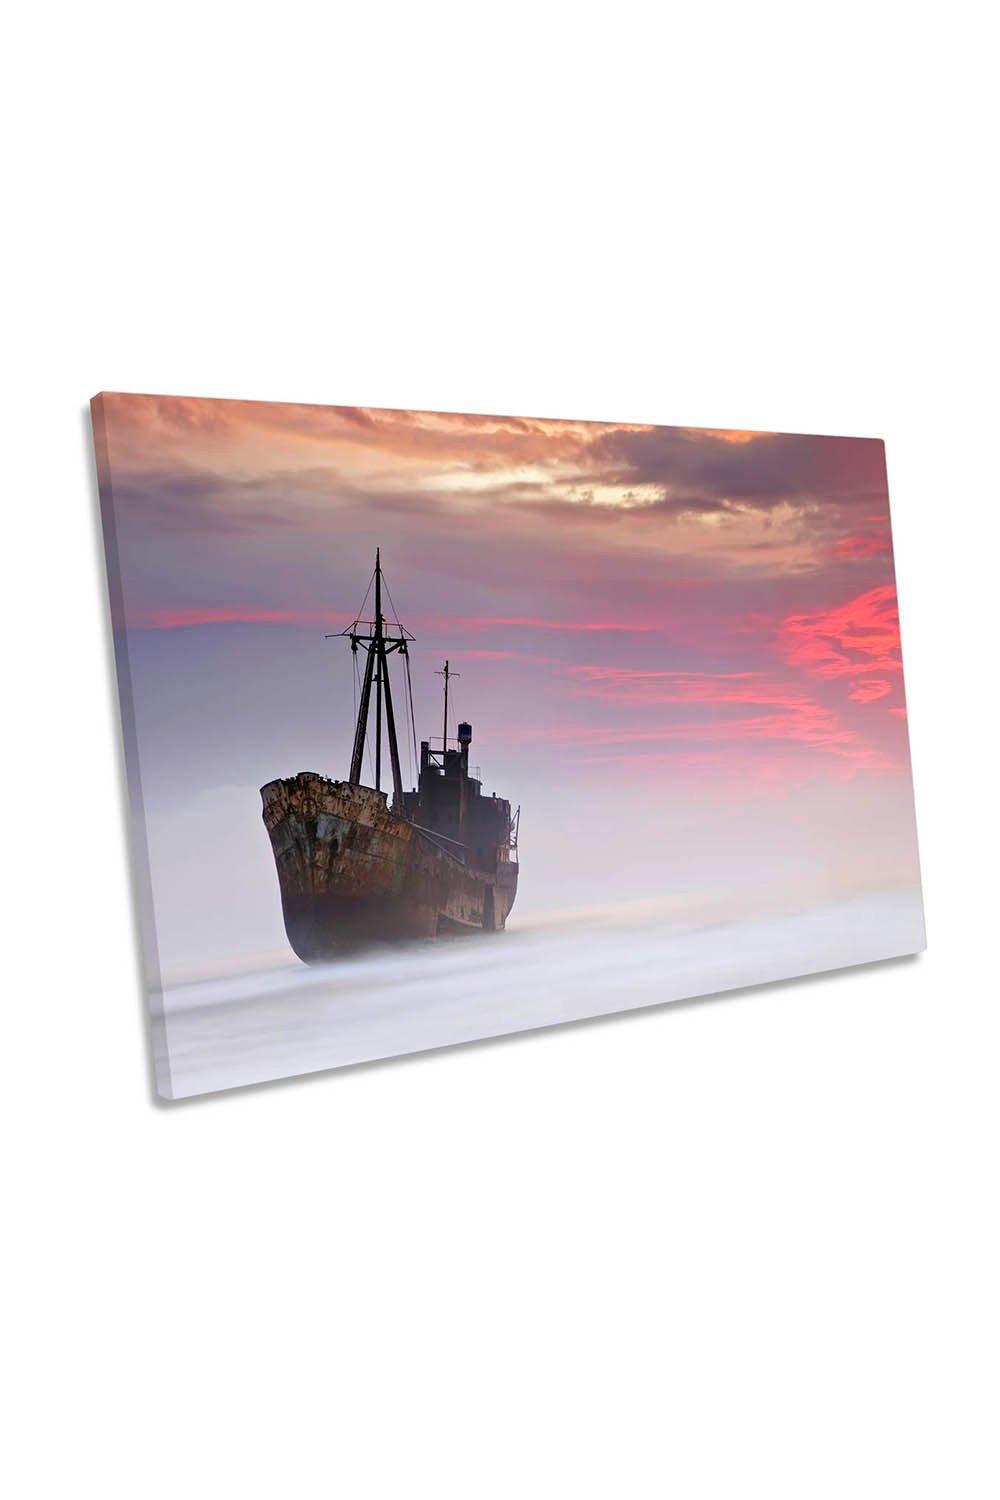 The Dark Traveller Ship Sunset Canvas Wall Art Picture Print